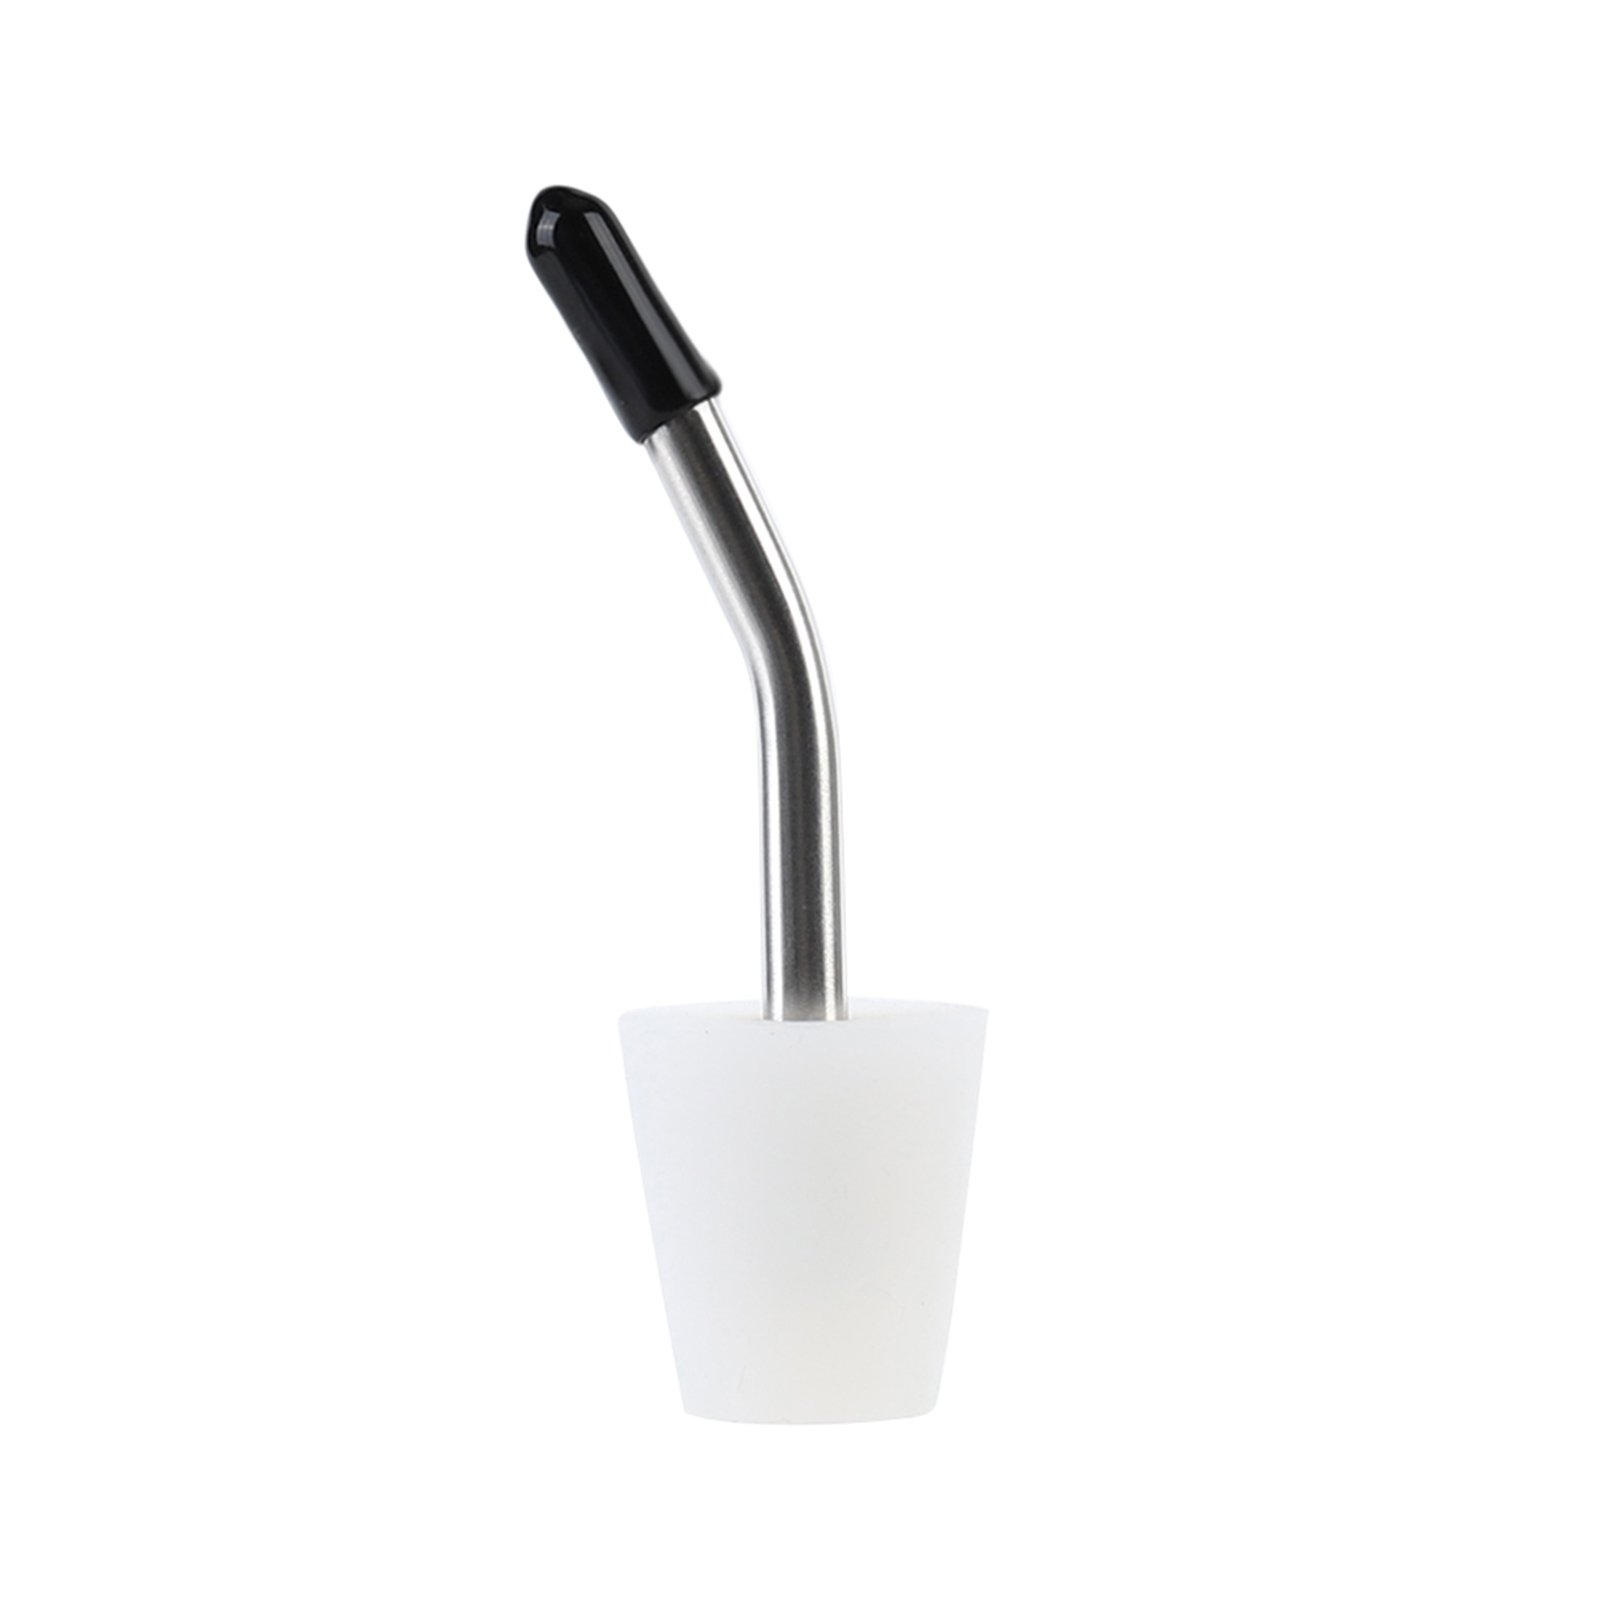 Stainless Steel Kettle Pourer Pouring Spout with Dust and Cleaning Brush for Tea Pot Coffee Pot - image 1 of 7